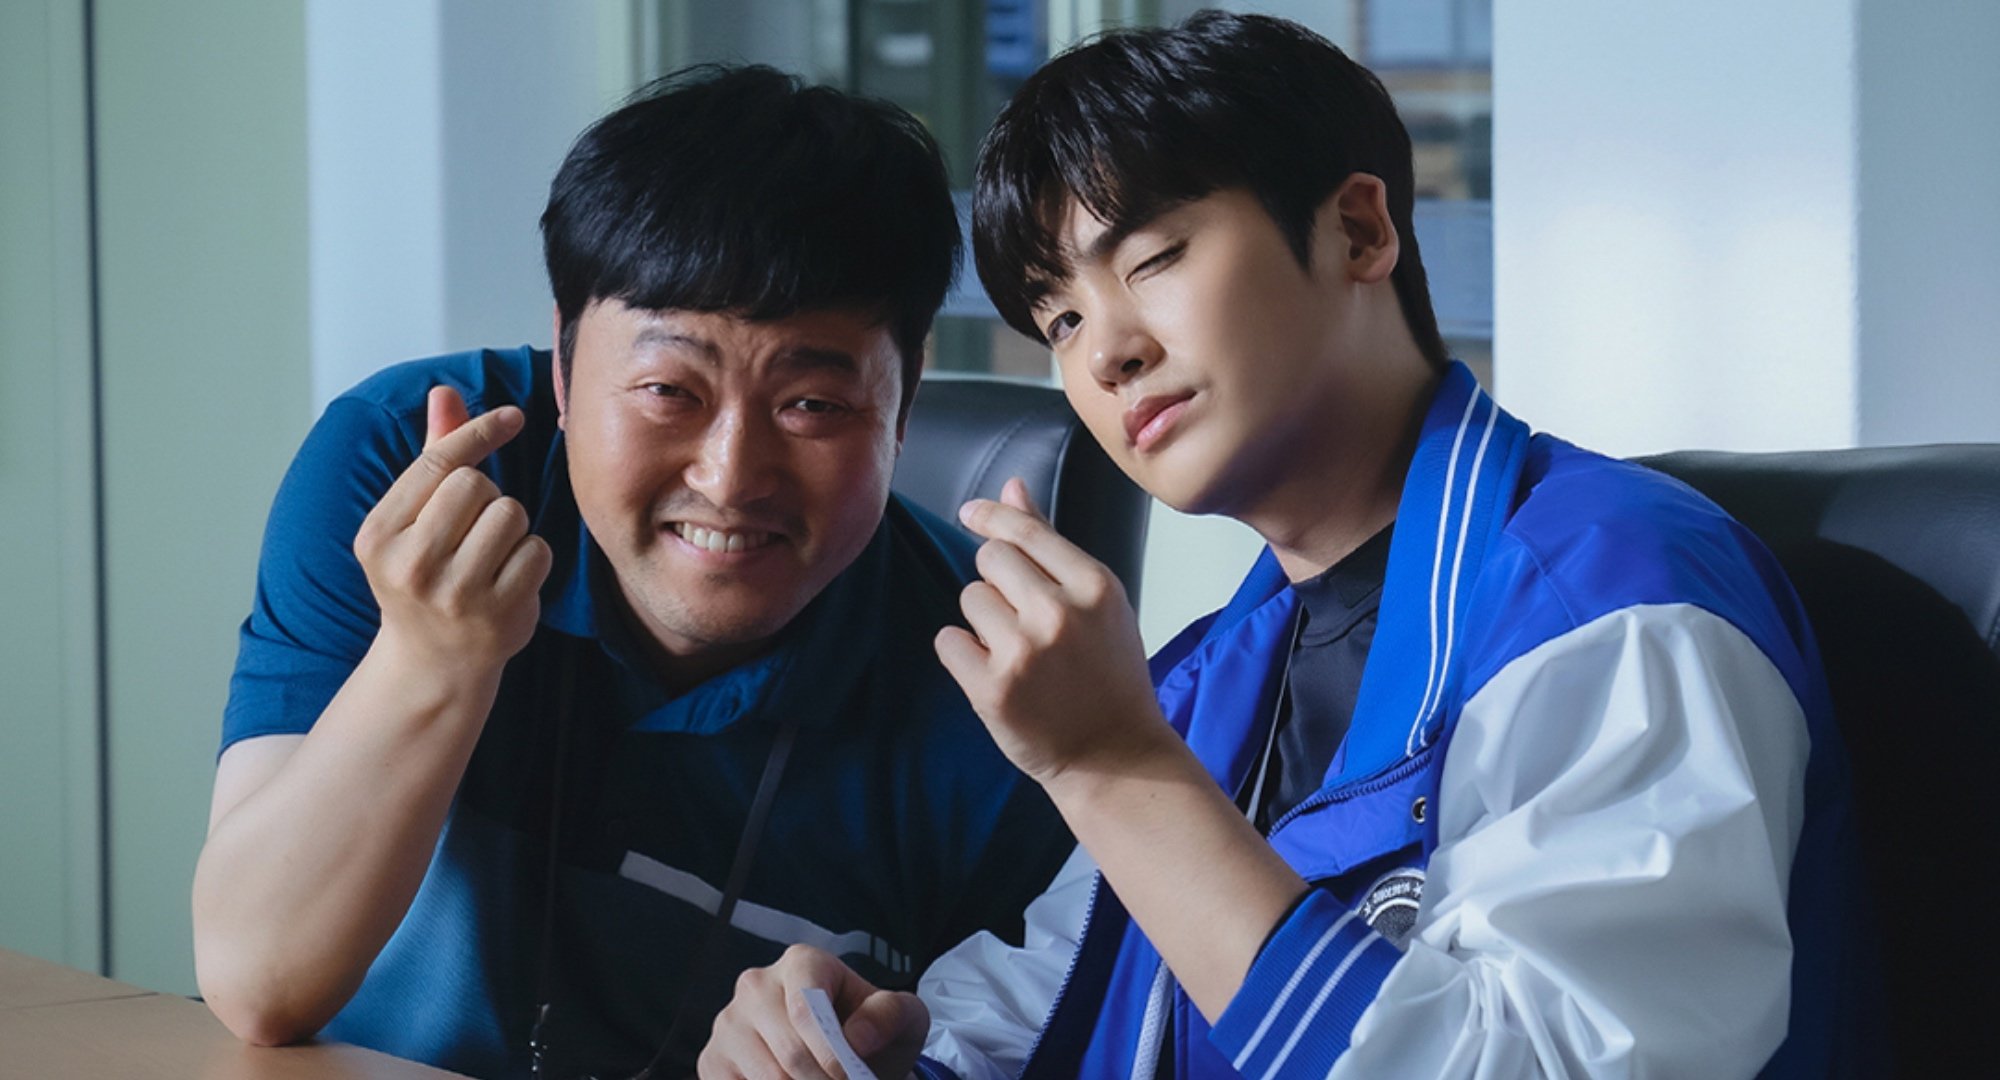 Actors Lee Jun-hyeok and Park Hyun-sik for 'Happiness' main cast holding up heart fingers.